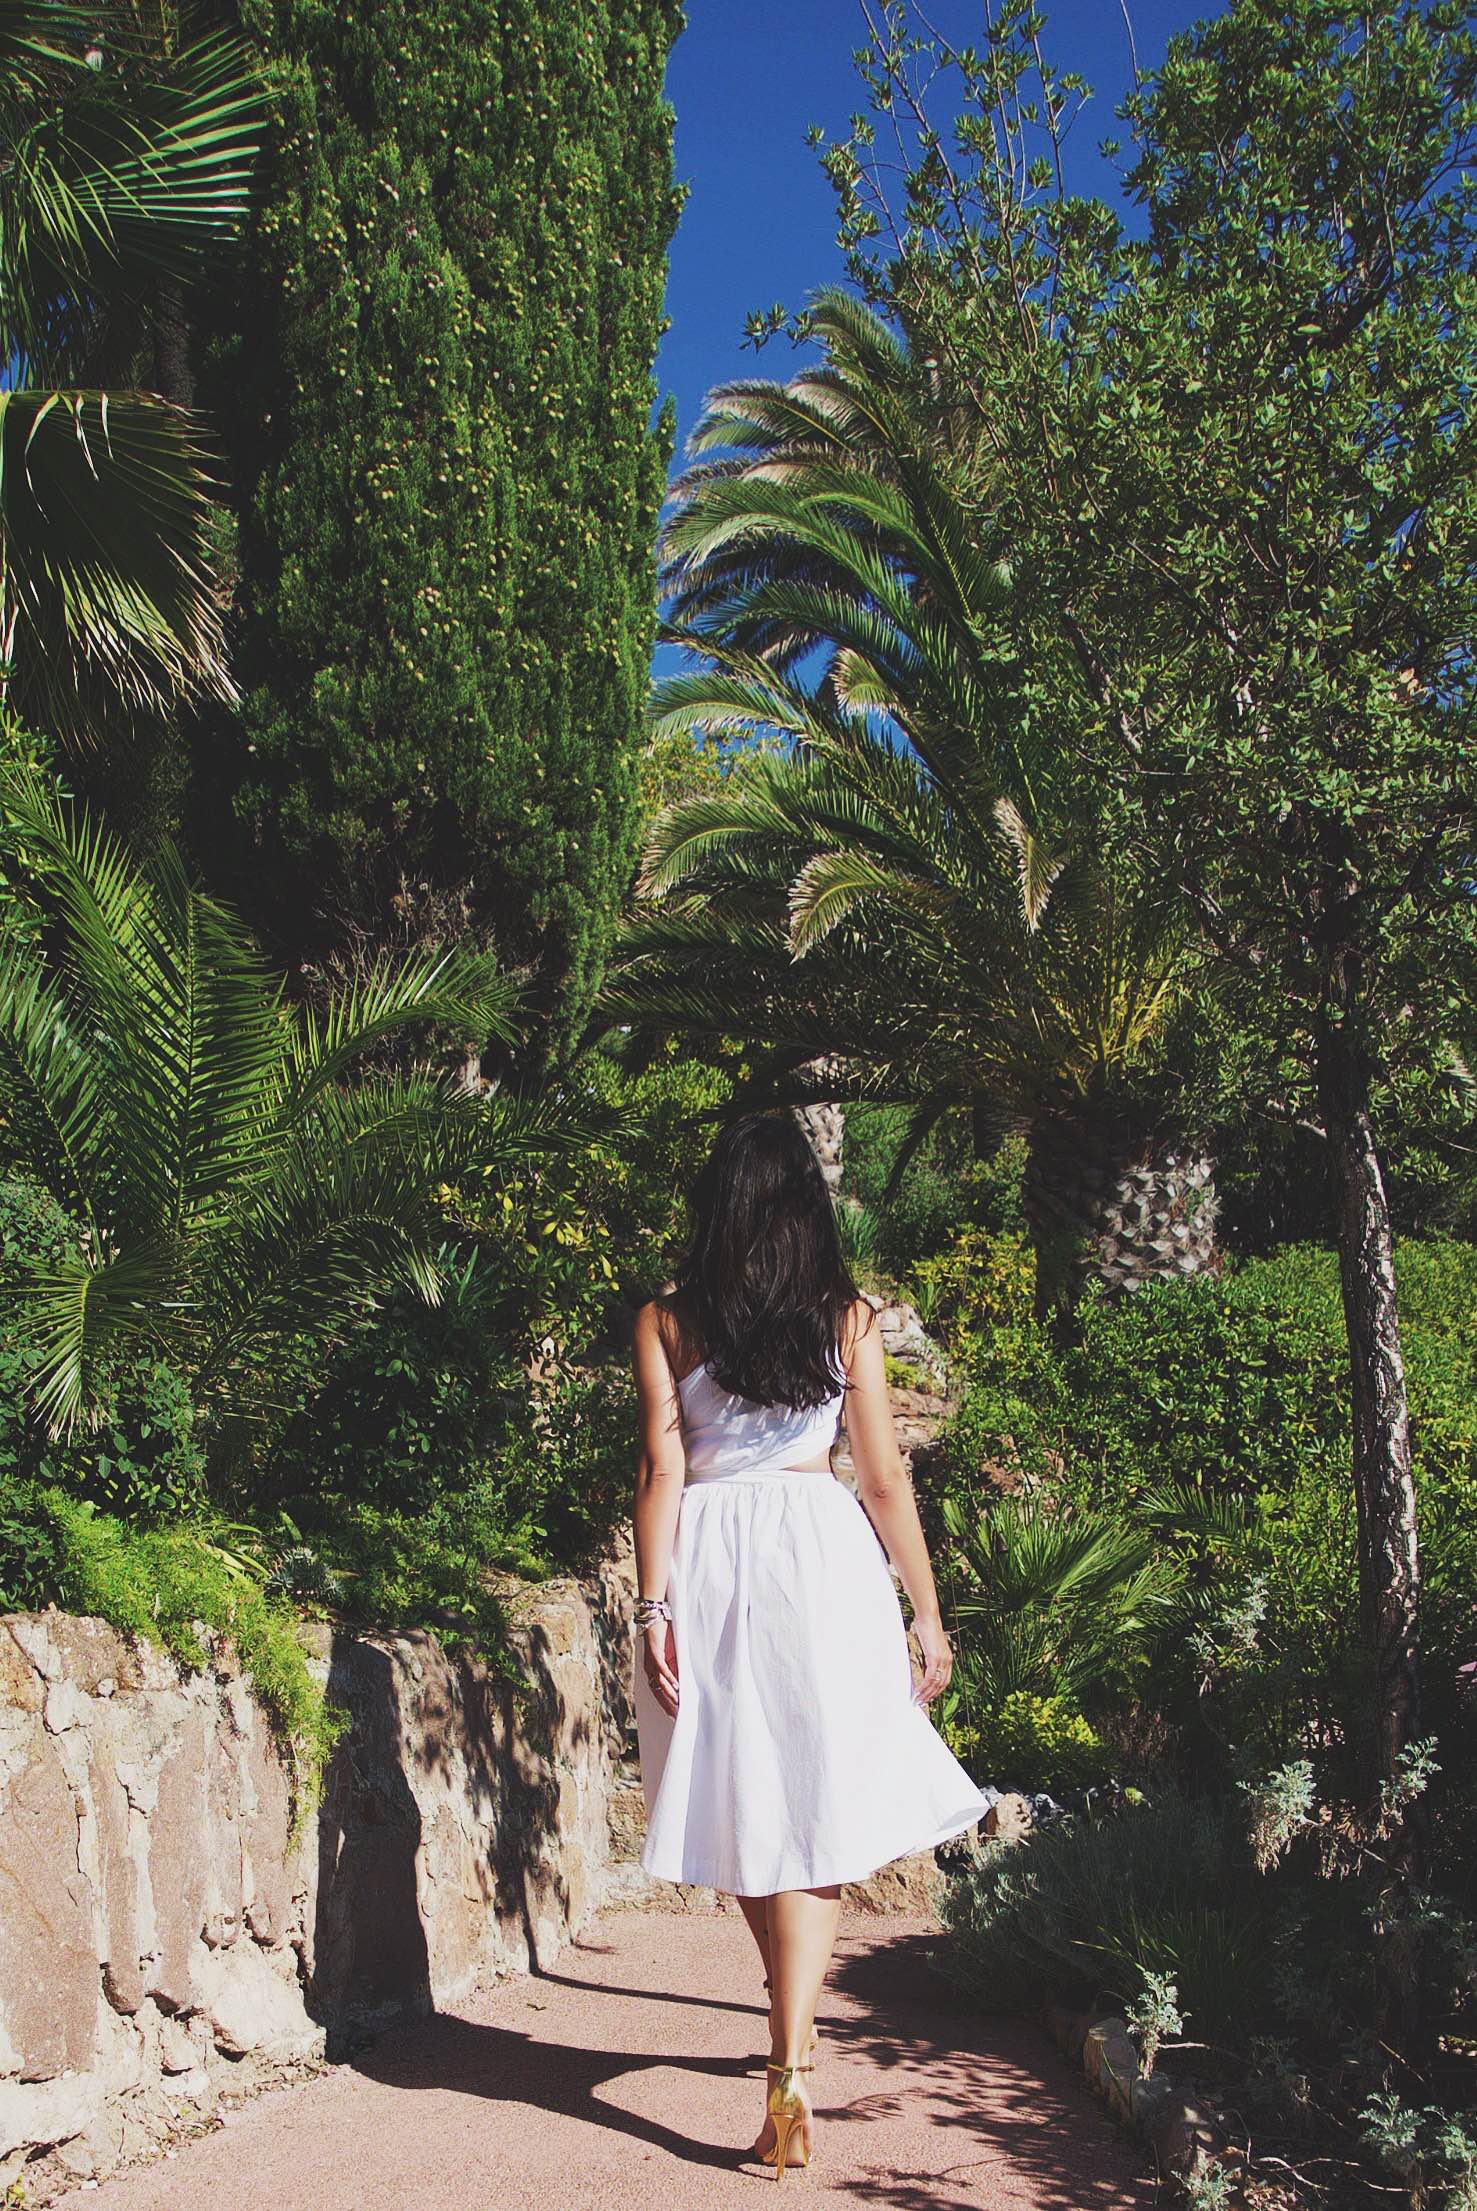 Lost-In-Paradise-Tiara-Miramar-Beach-Hotel-Cannes-France-2015-Disi-Couture-01